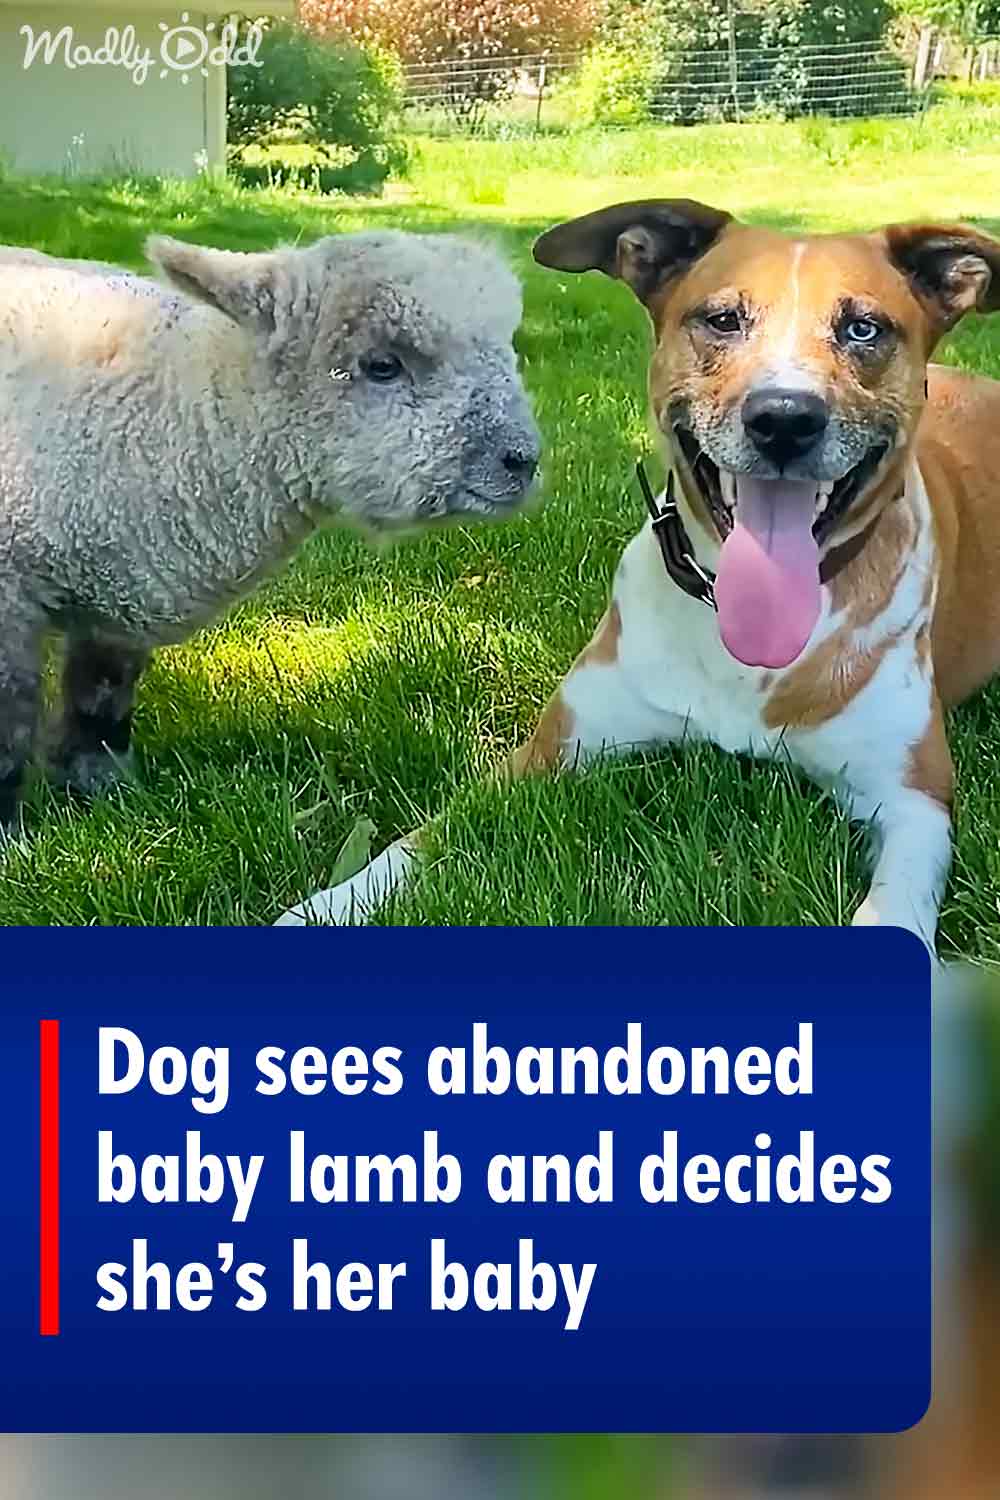 Dog sees abandoned baby lamb and decides she’s her baby